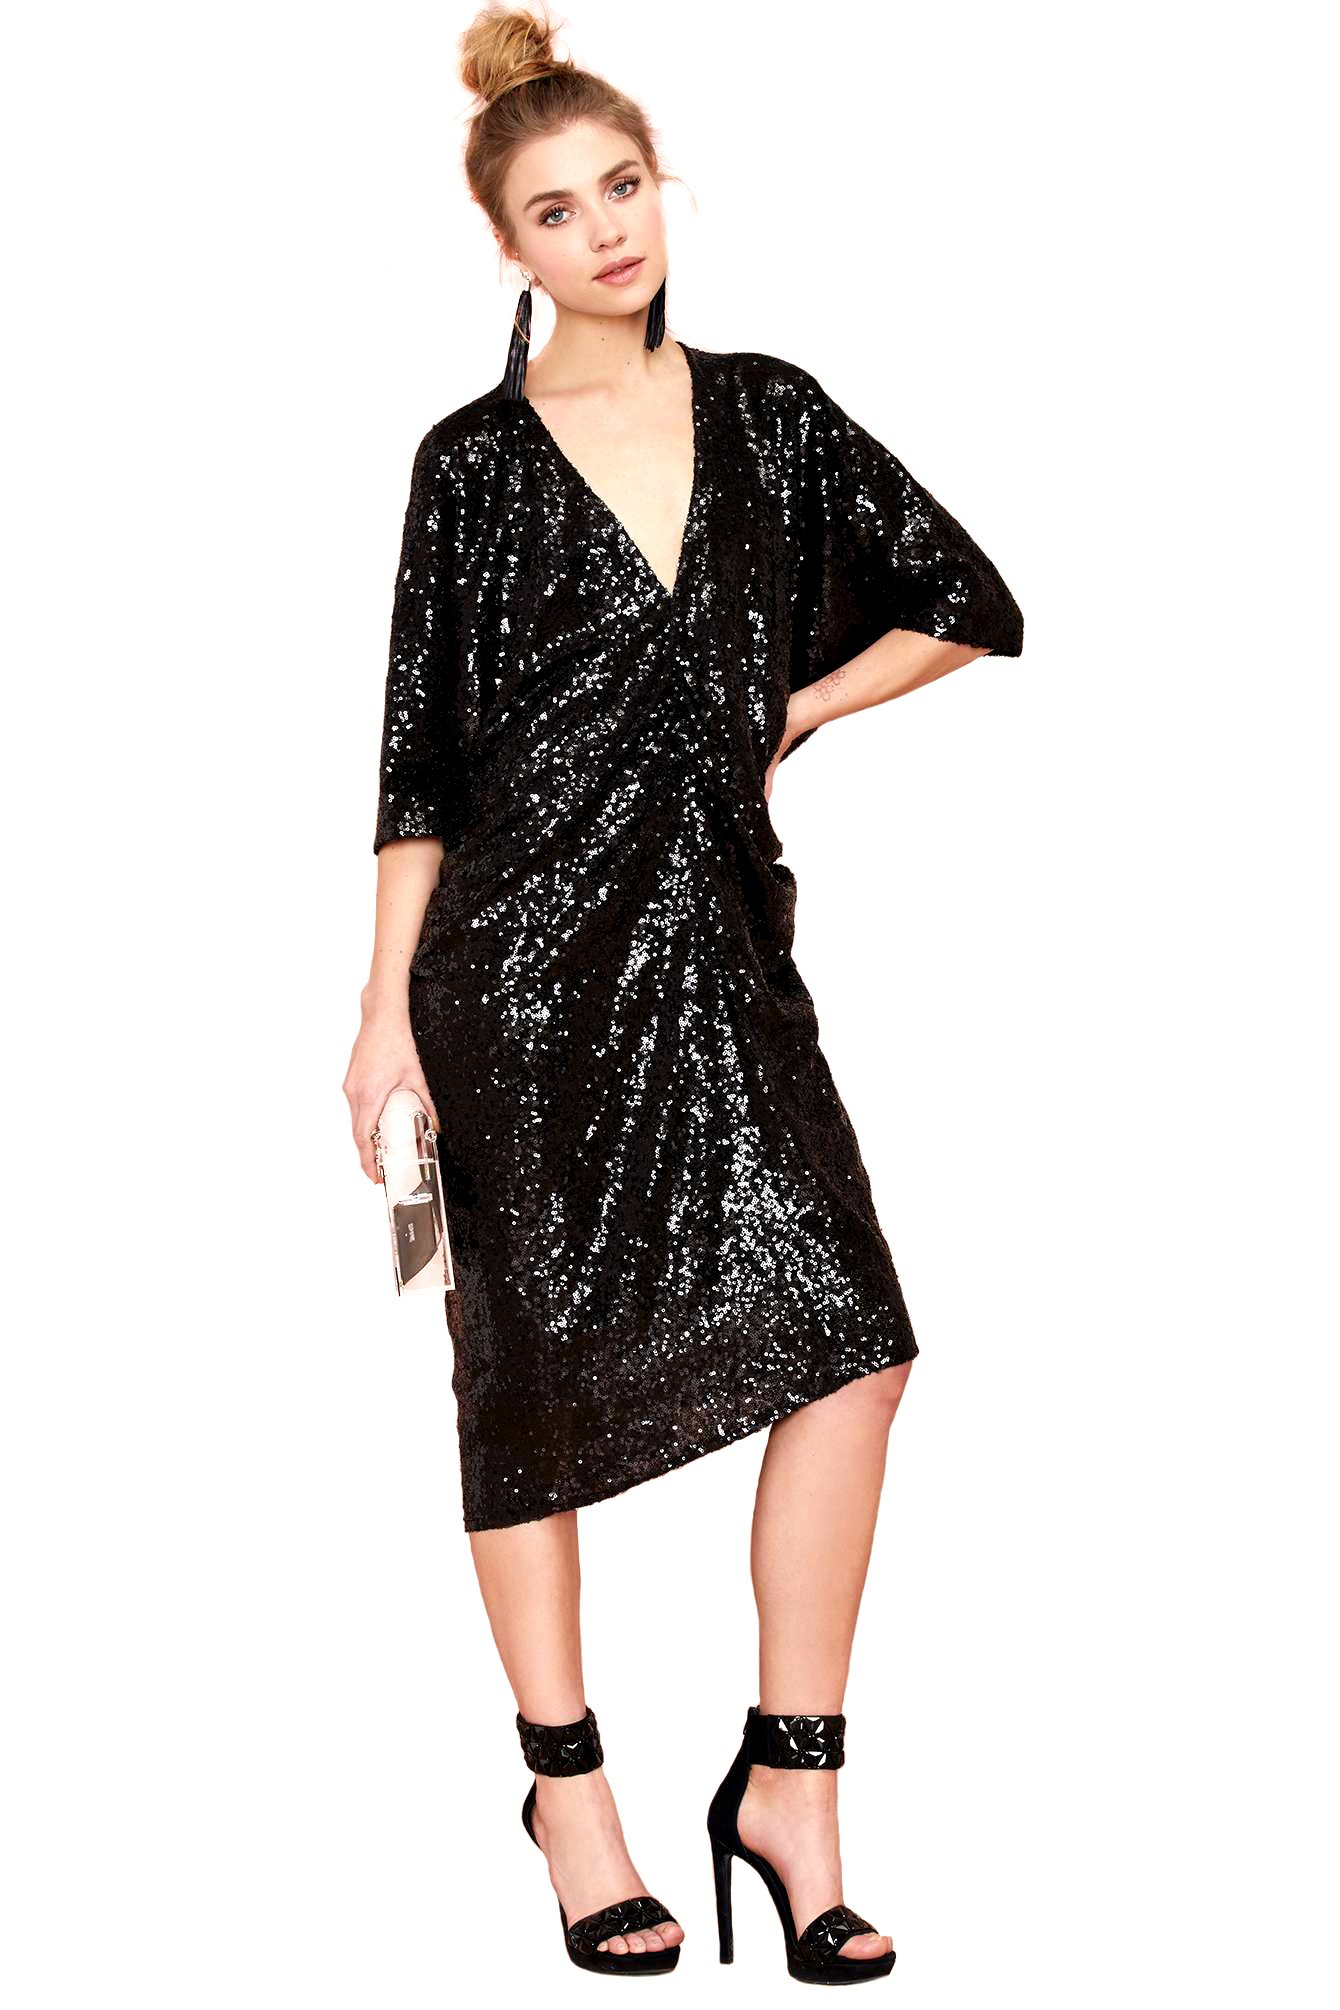 12 glittery pieces you could wear to any New Year's Eve party  